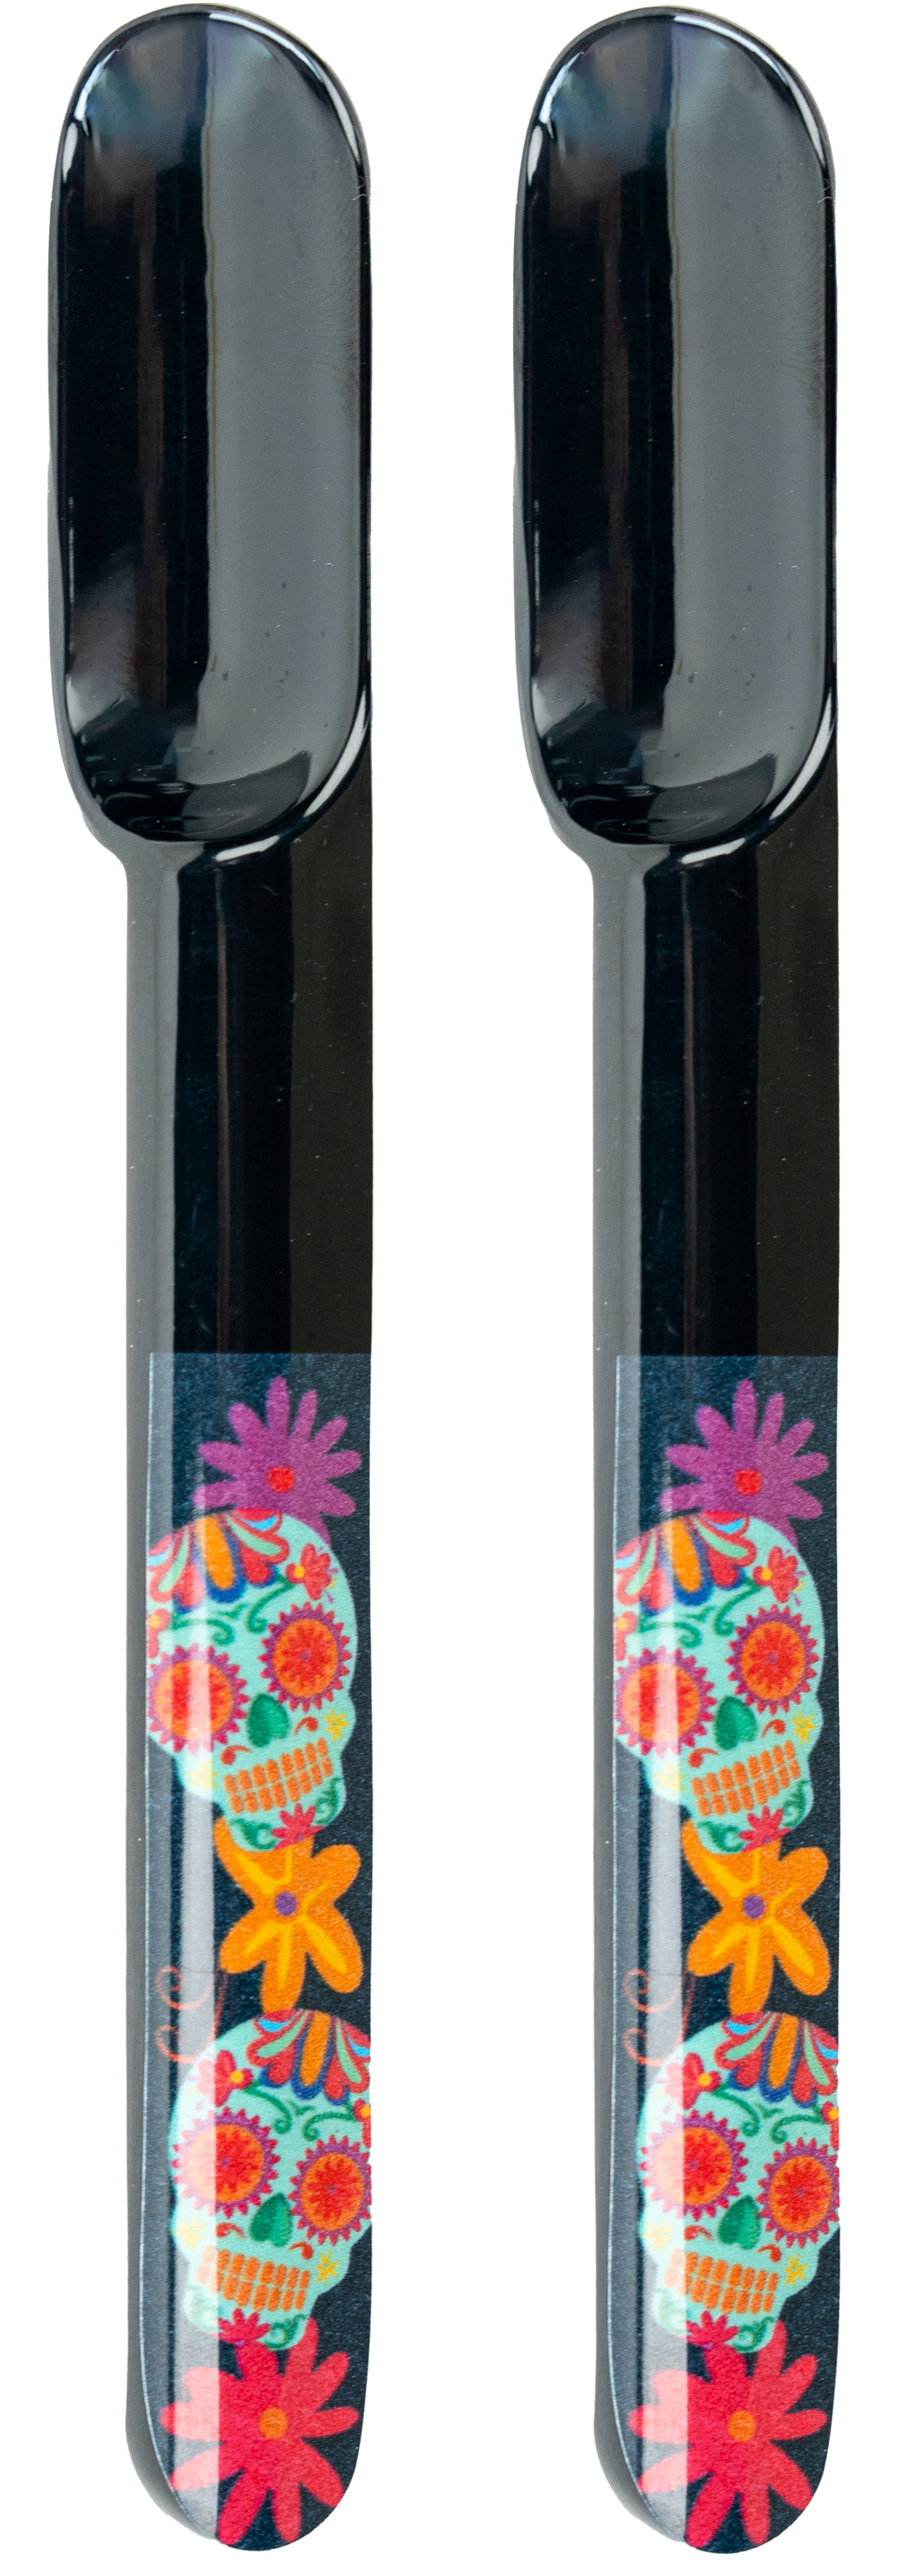 Taco Spoons - Set of 2｜DAY OF THE DEAD EDITION